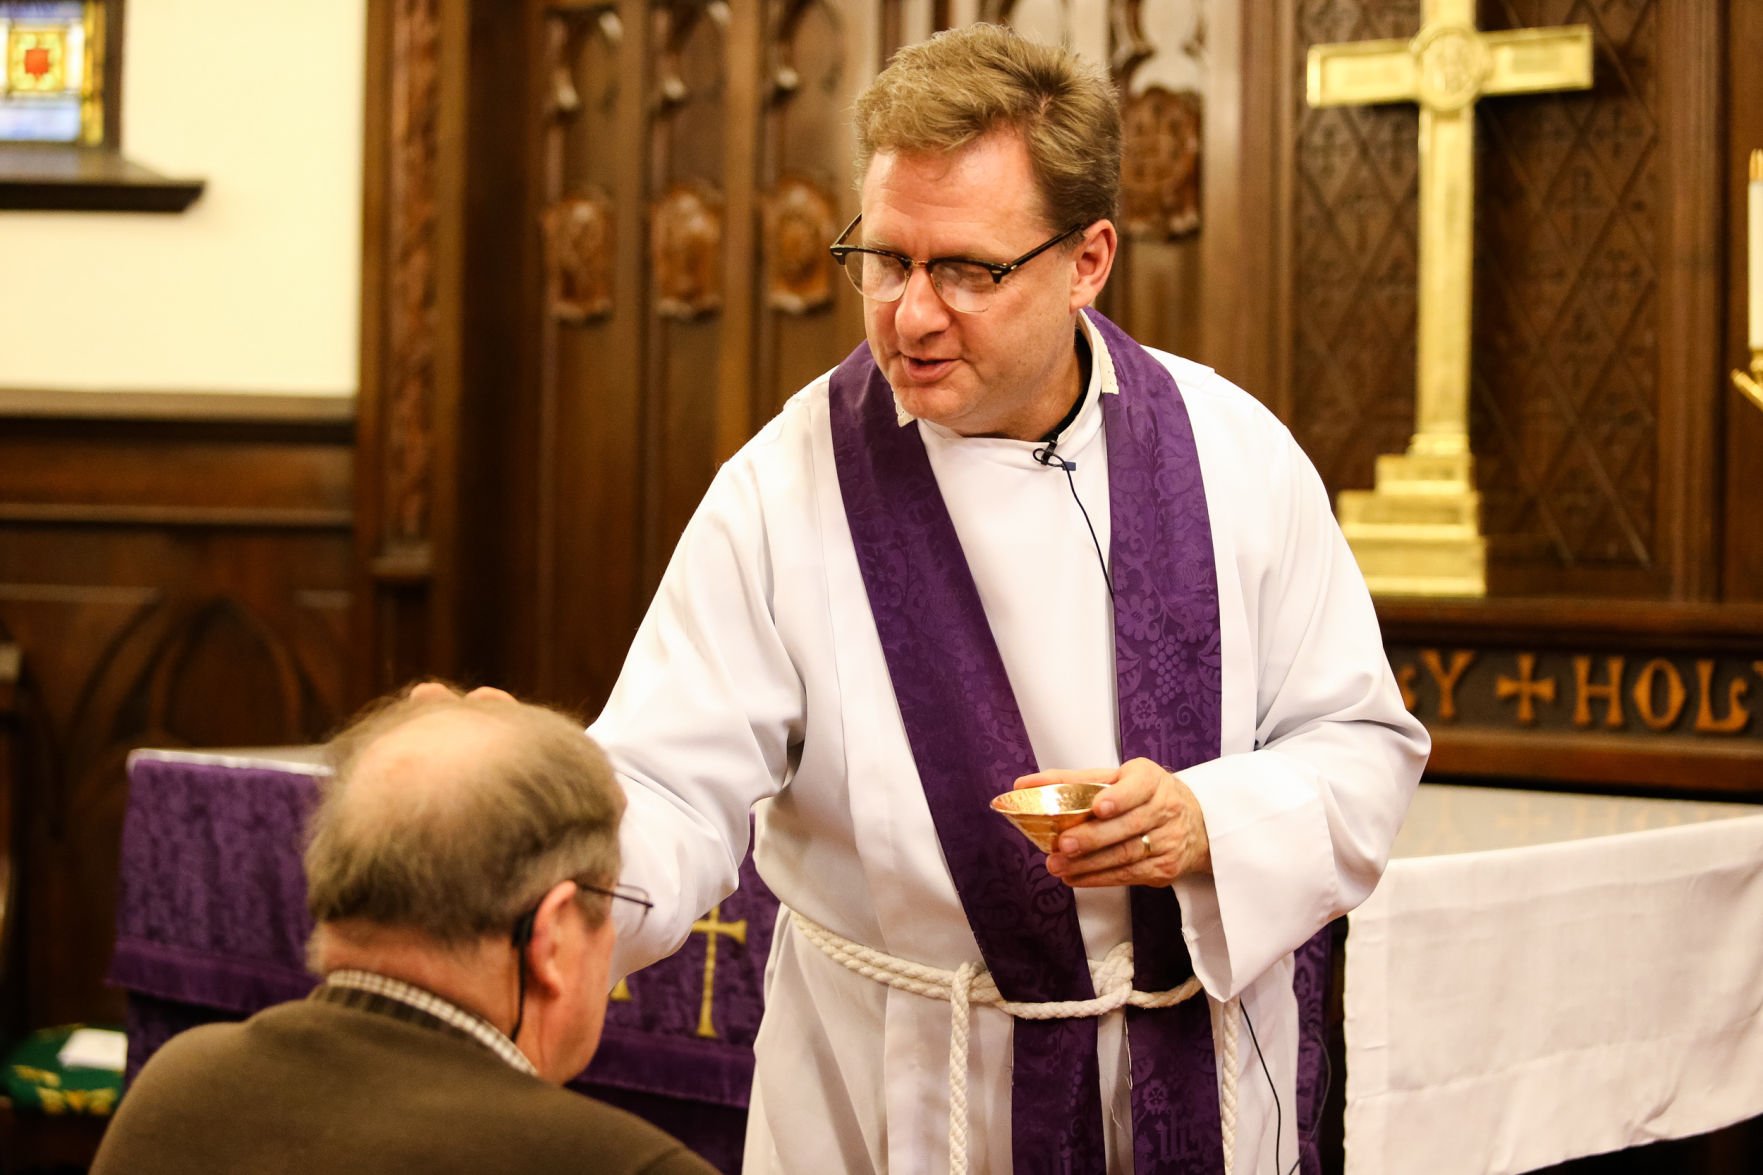 episcopal imposition of ashes